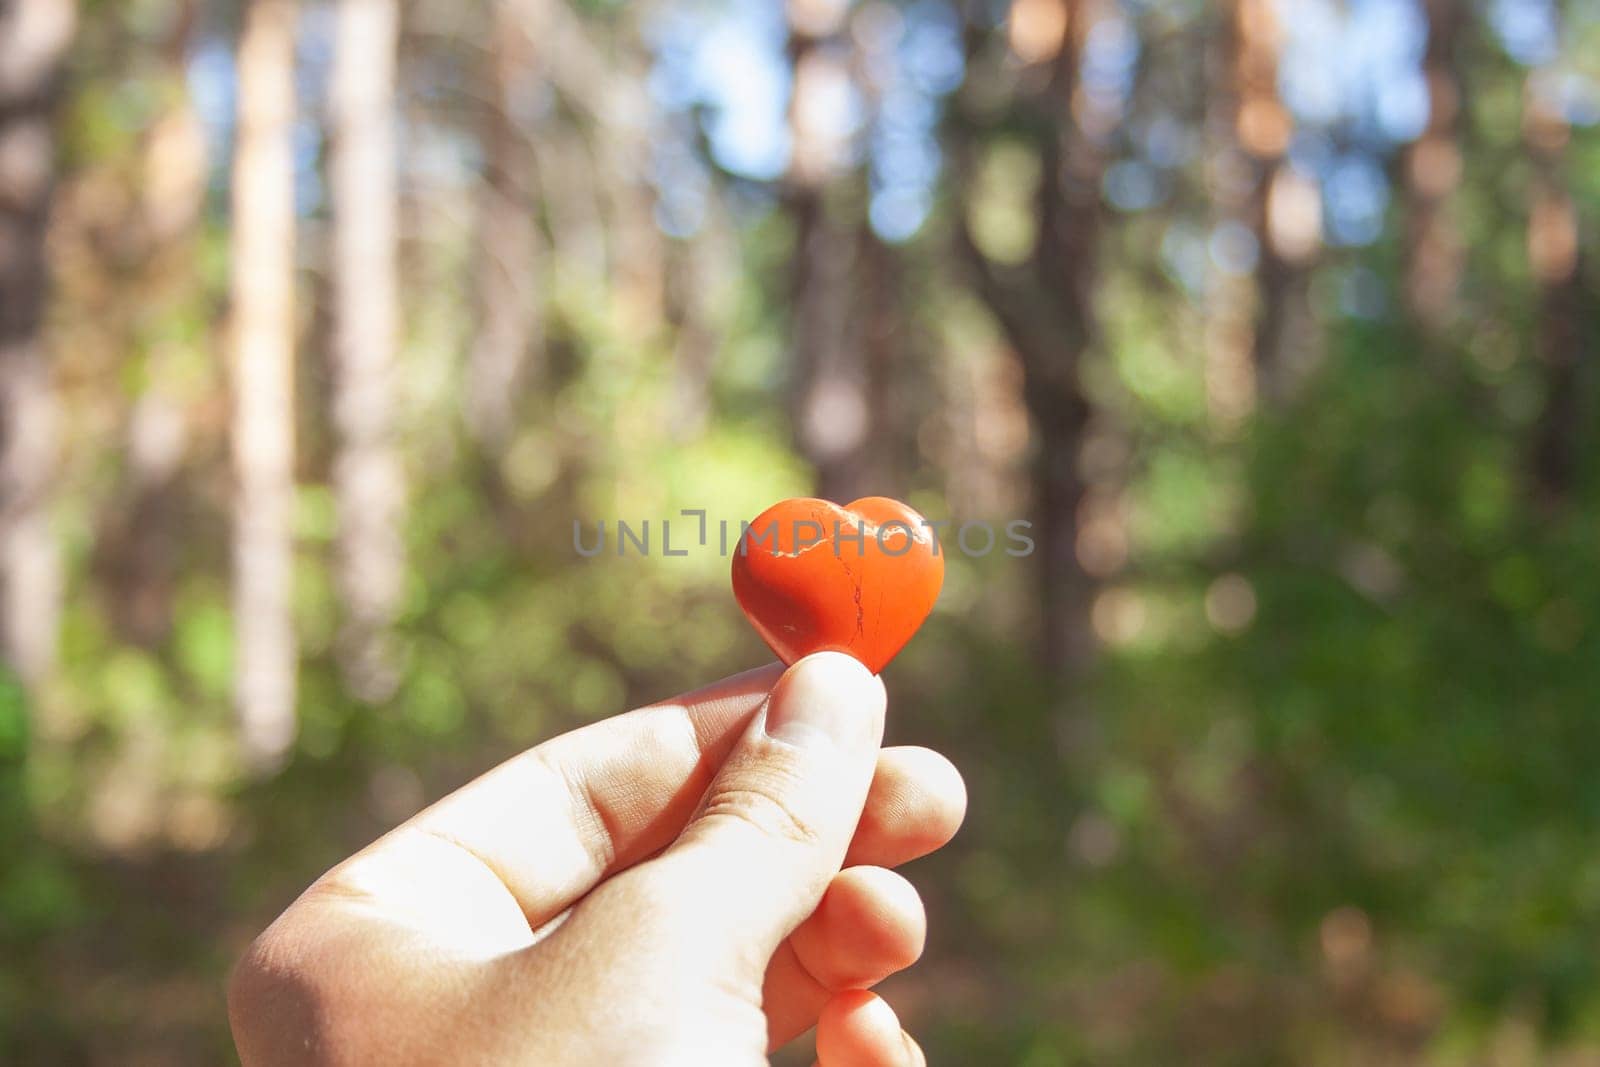 Little stone toy heart shape in man's hand on forest background by Quils